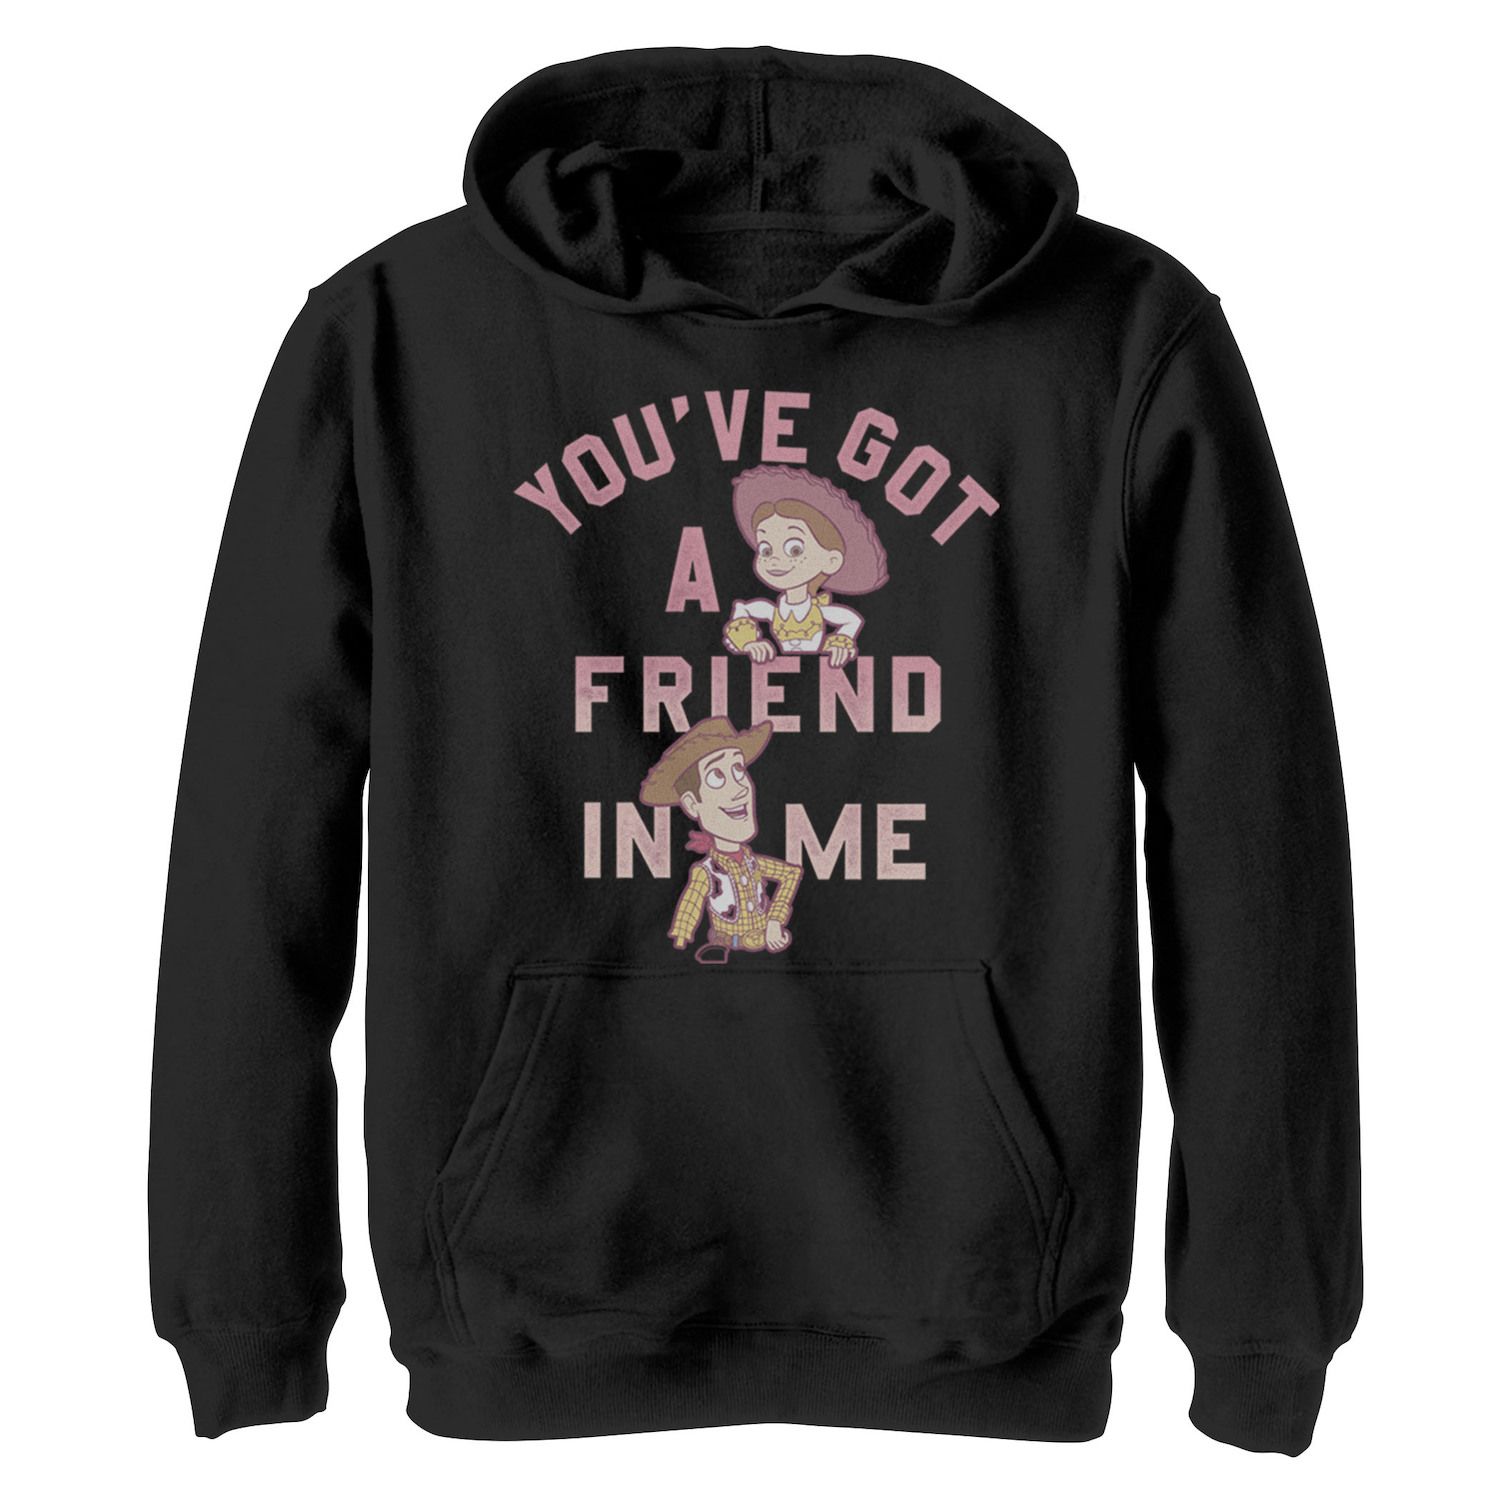 Image for Disney / Pixar 's Toy Story Boys 8-20 Got A Friend In Me Graphic Fleece Hoodie at Kohl's.